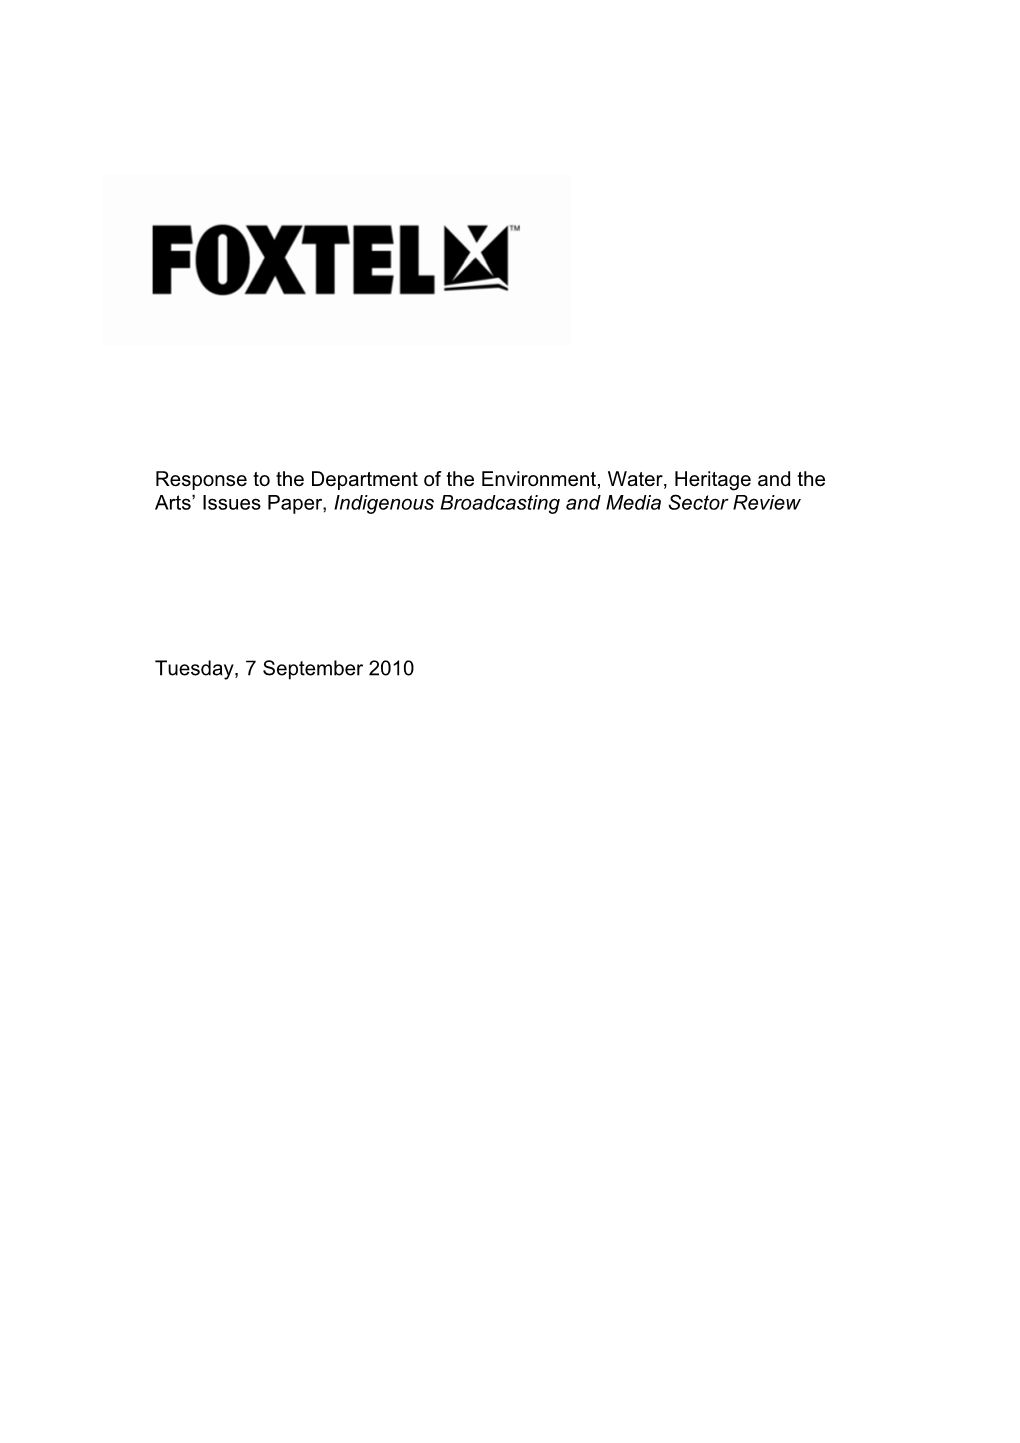 Response to the Department of the Environment, Water, Heritage and the Arts’ Issues Paper, Indigenous Broadcasting and Media Sector Review